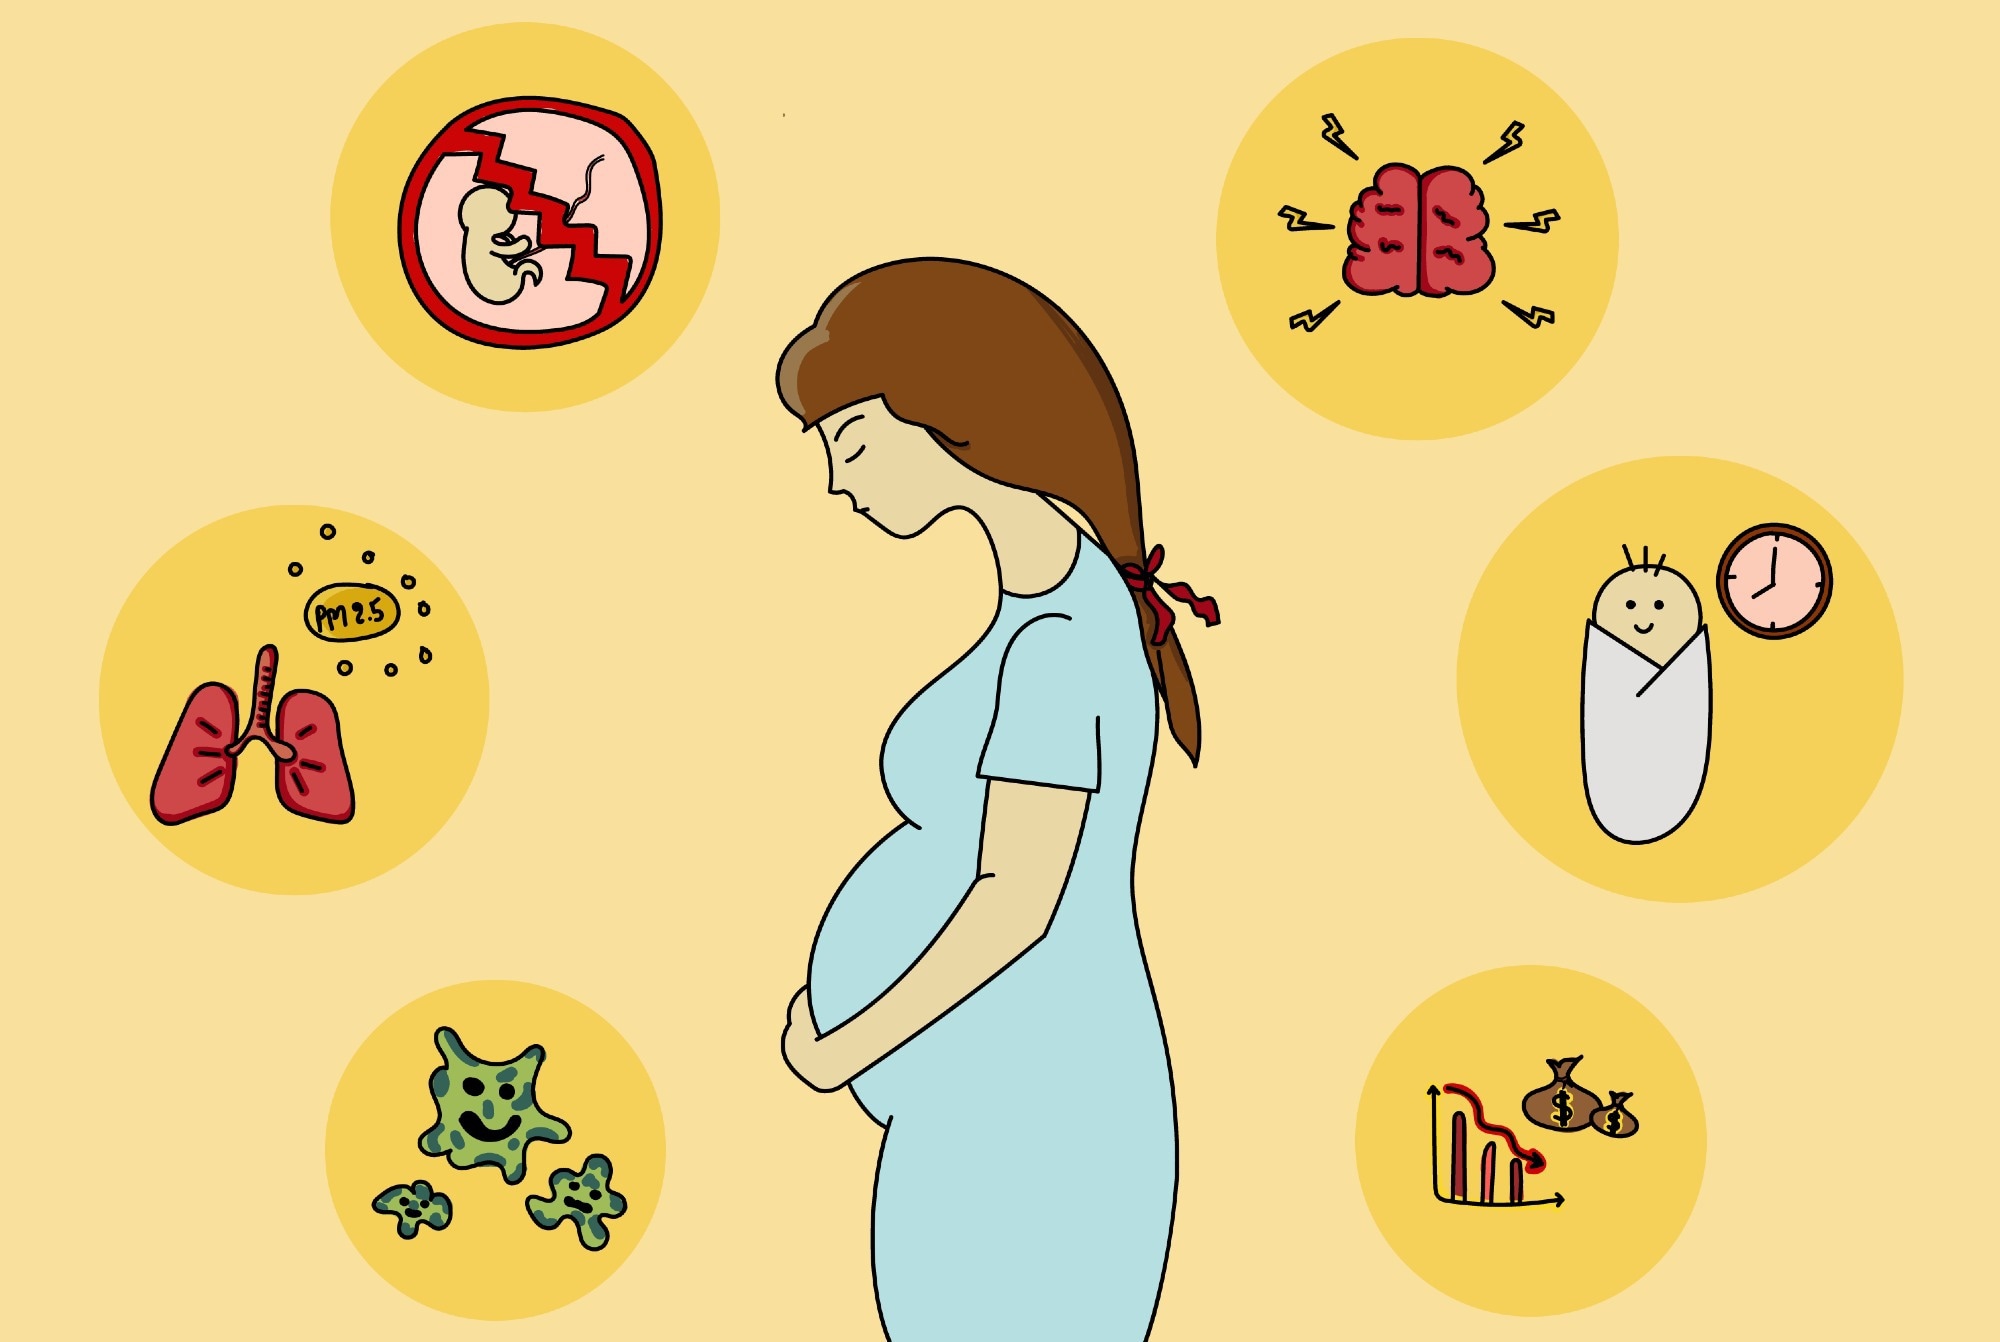 Study: Depression, Anxiety, and Stress in Pregnancy and Postpartum: A Longitudinal Study During the COVID-19 Pandemic. Image Credit: Mr.Thunman / Shutterstock